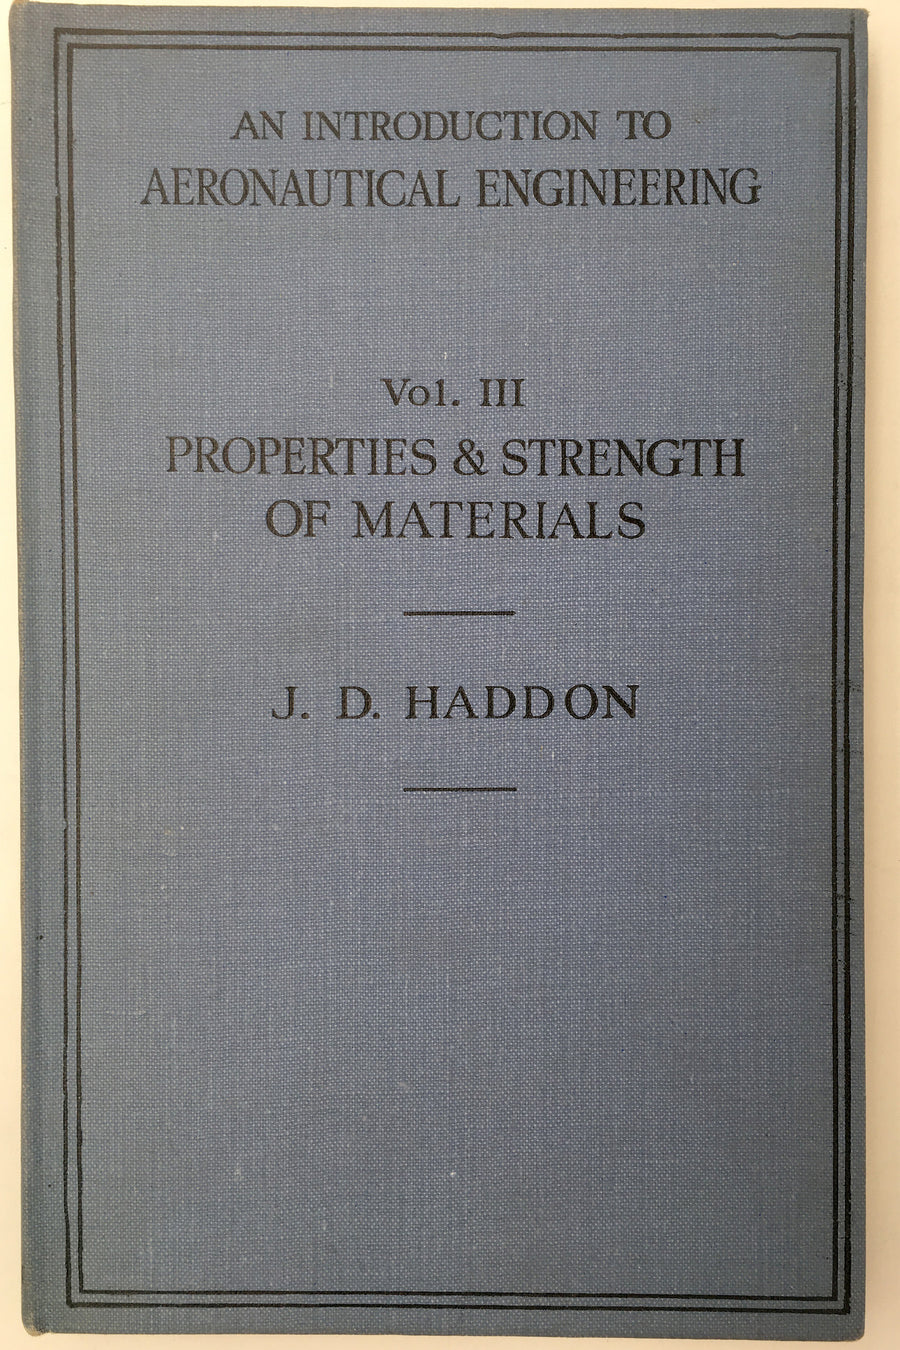 AN INTRODUCTION TO AERONAUTICAL ENGINEERING. VOL III PROPERTIES & STRENGTH OF MATERIAL